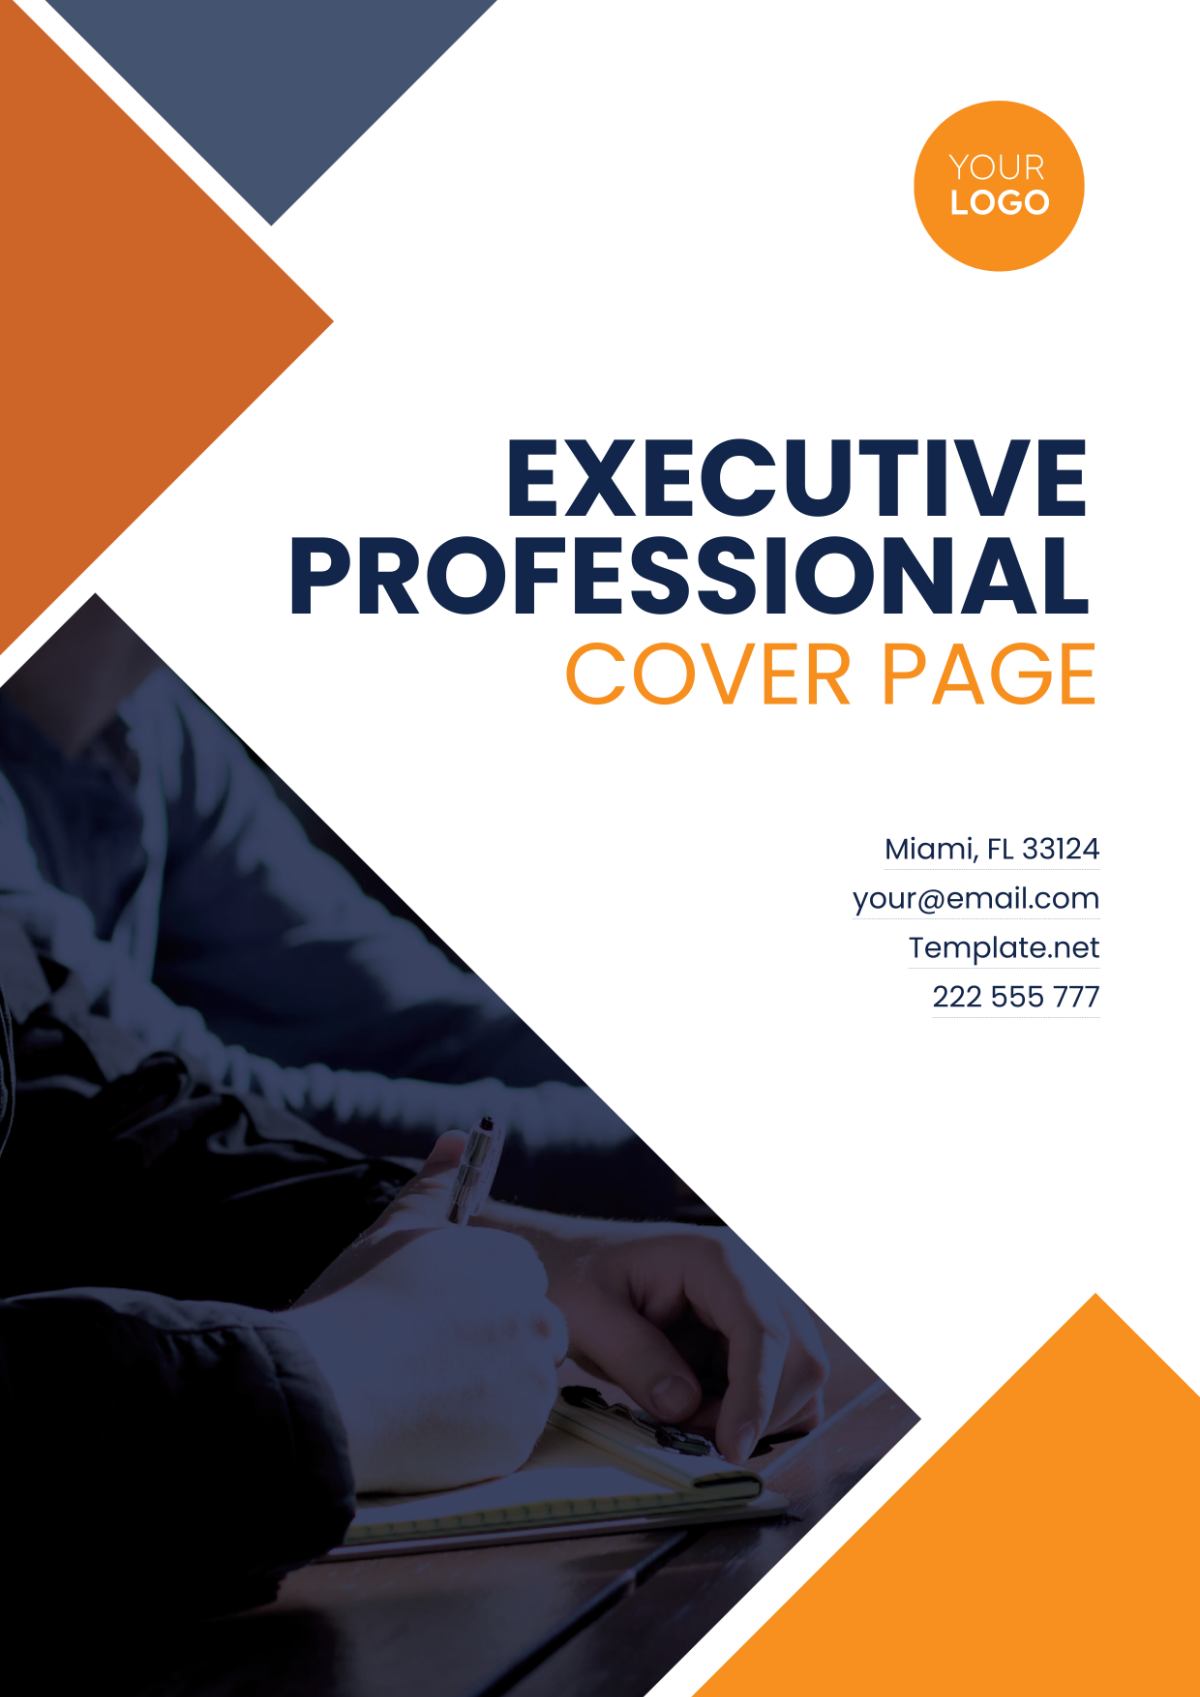 Executive Professional Cover Page